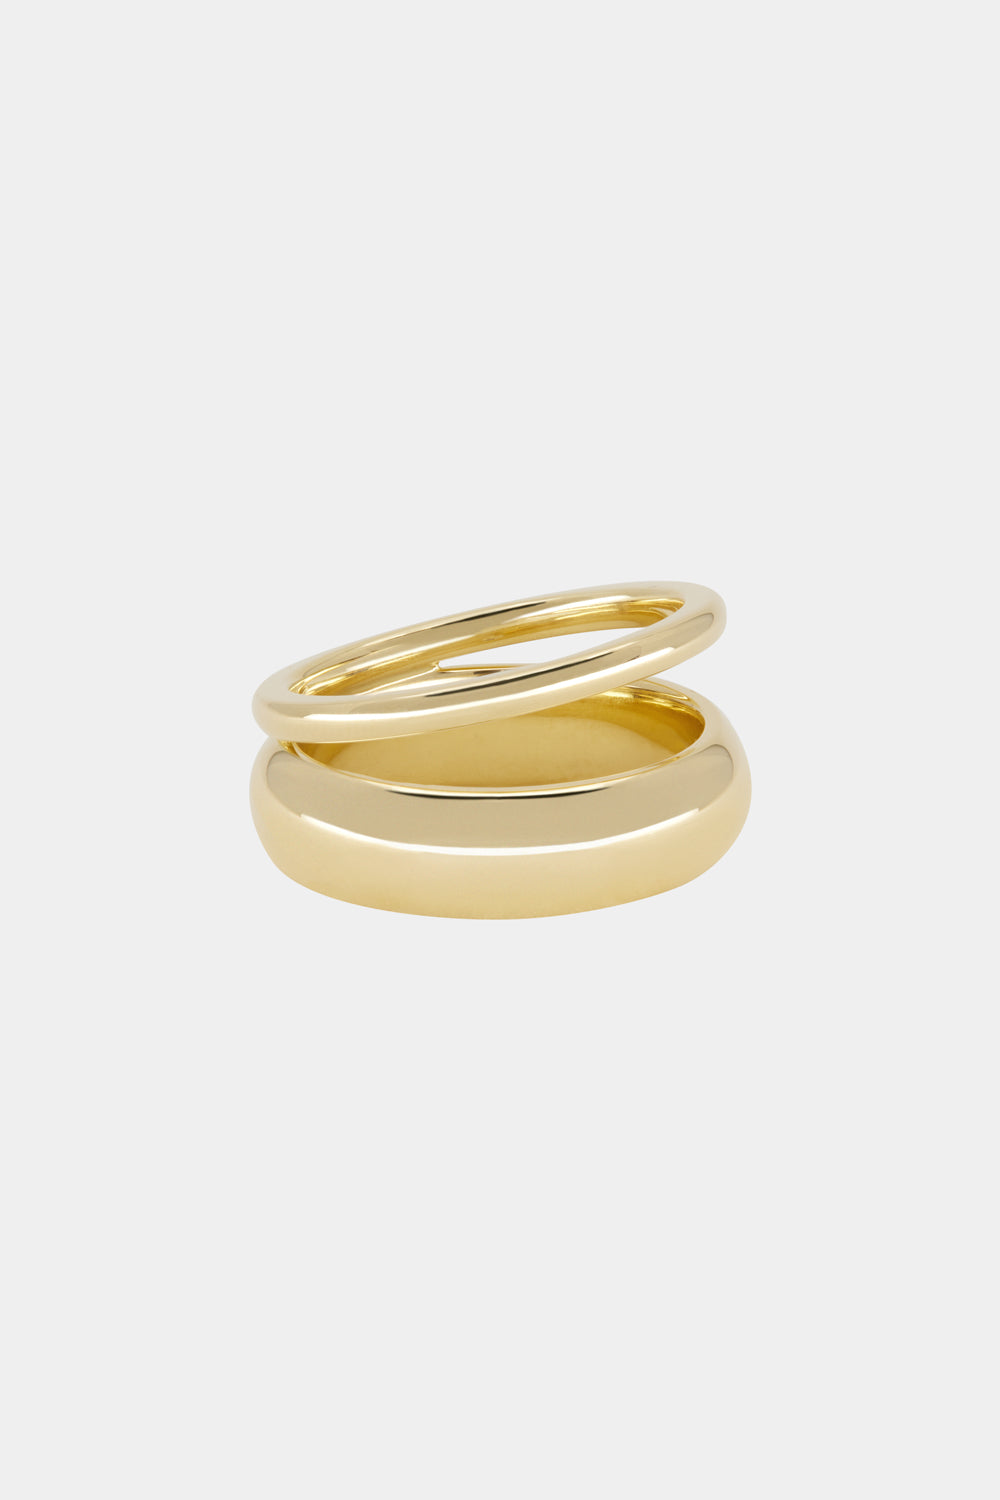 Double Band Sabine Ring | 9K Yellow Gold, Diamond Option Available